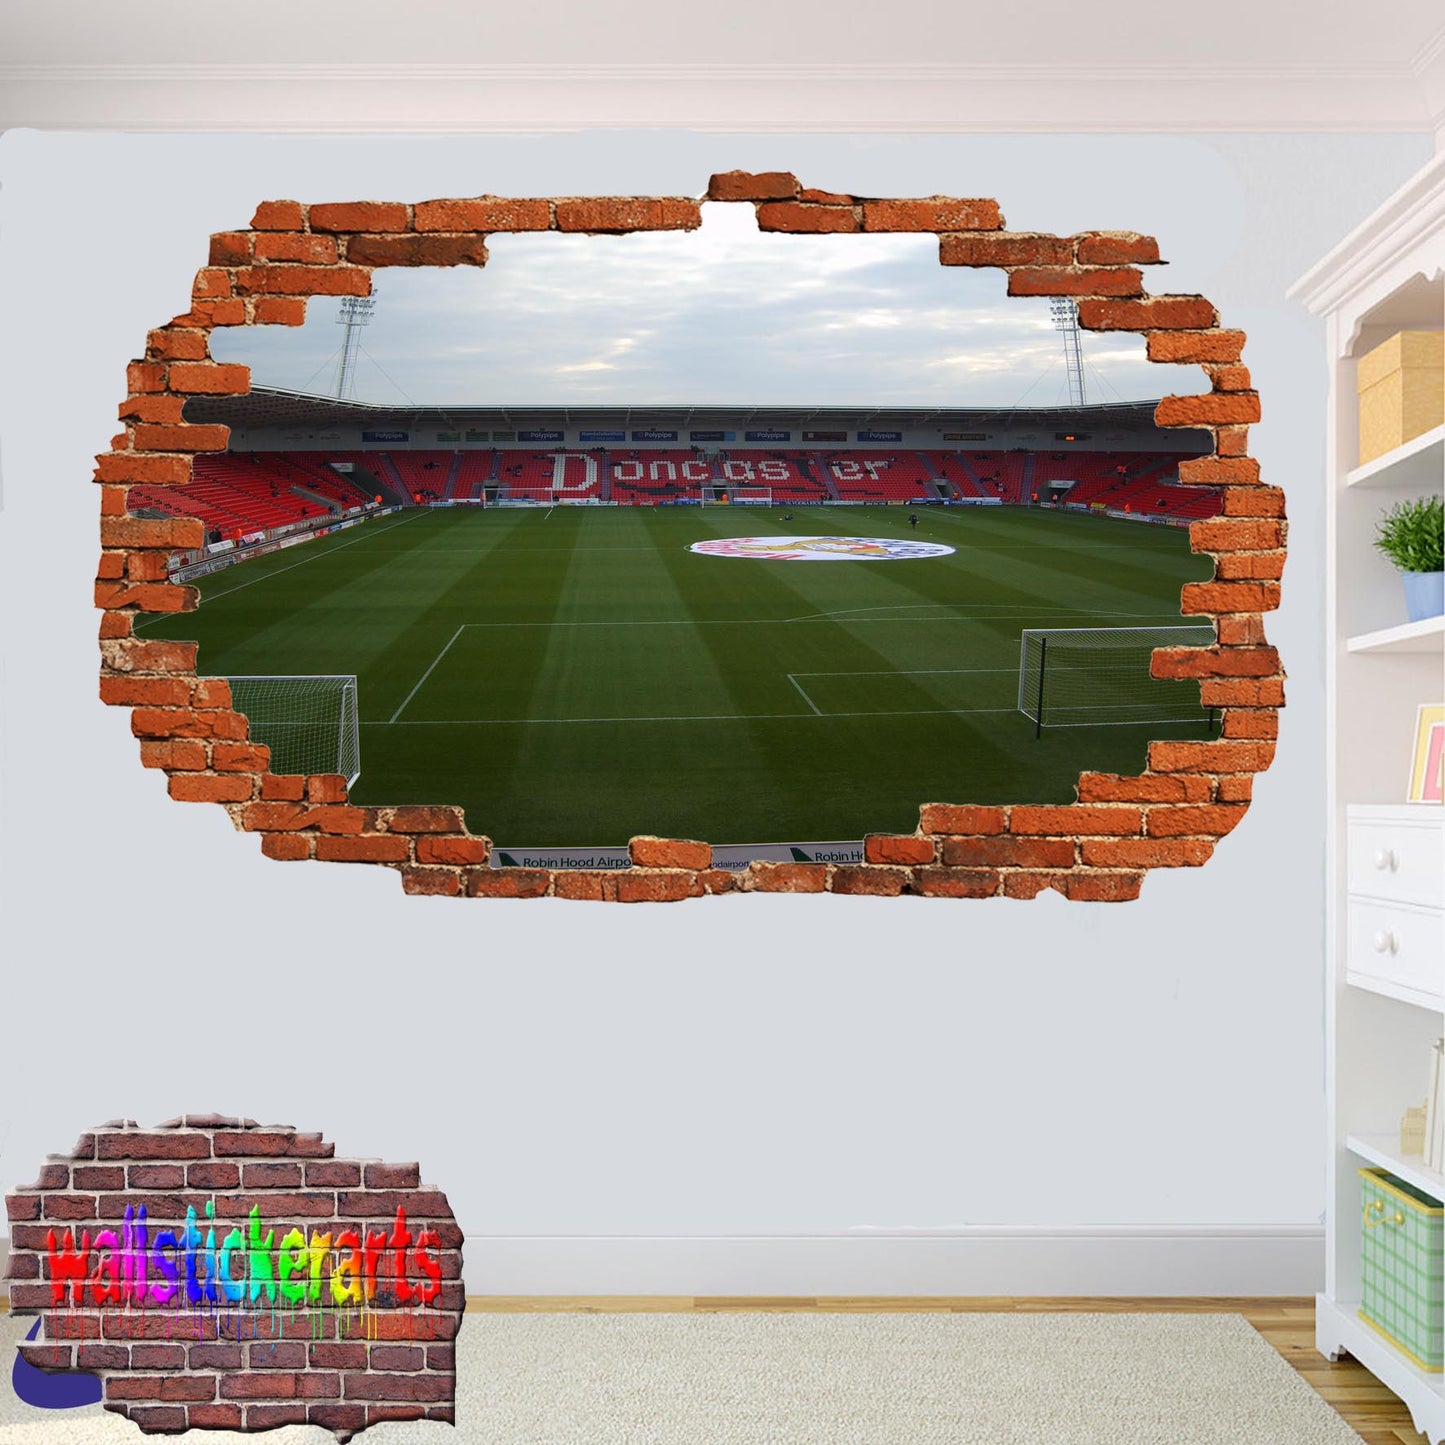 Doncaster Rovers Keepmoat Football Stadium 3d Smashed Wall Sticker Mural Room Office Shop Decoration Decal YY9